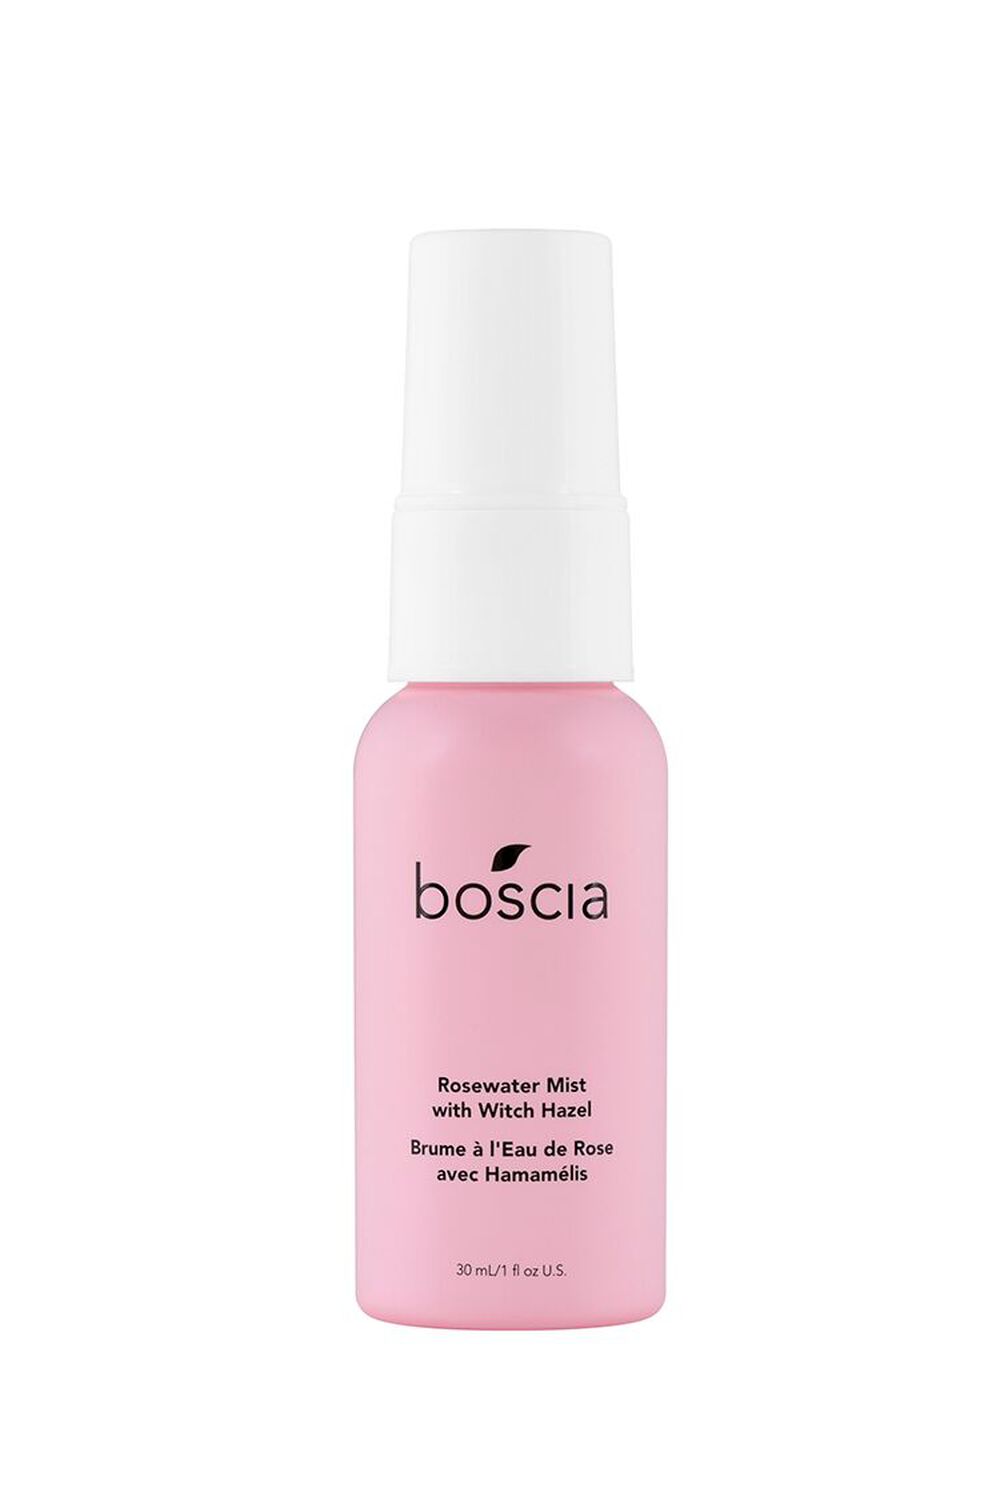 ROSEWATER Rosewater Mist with Witch Hazel, image 1